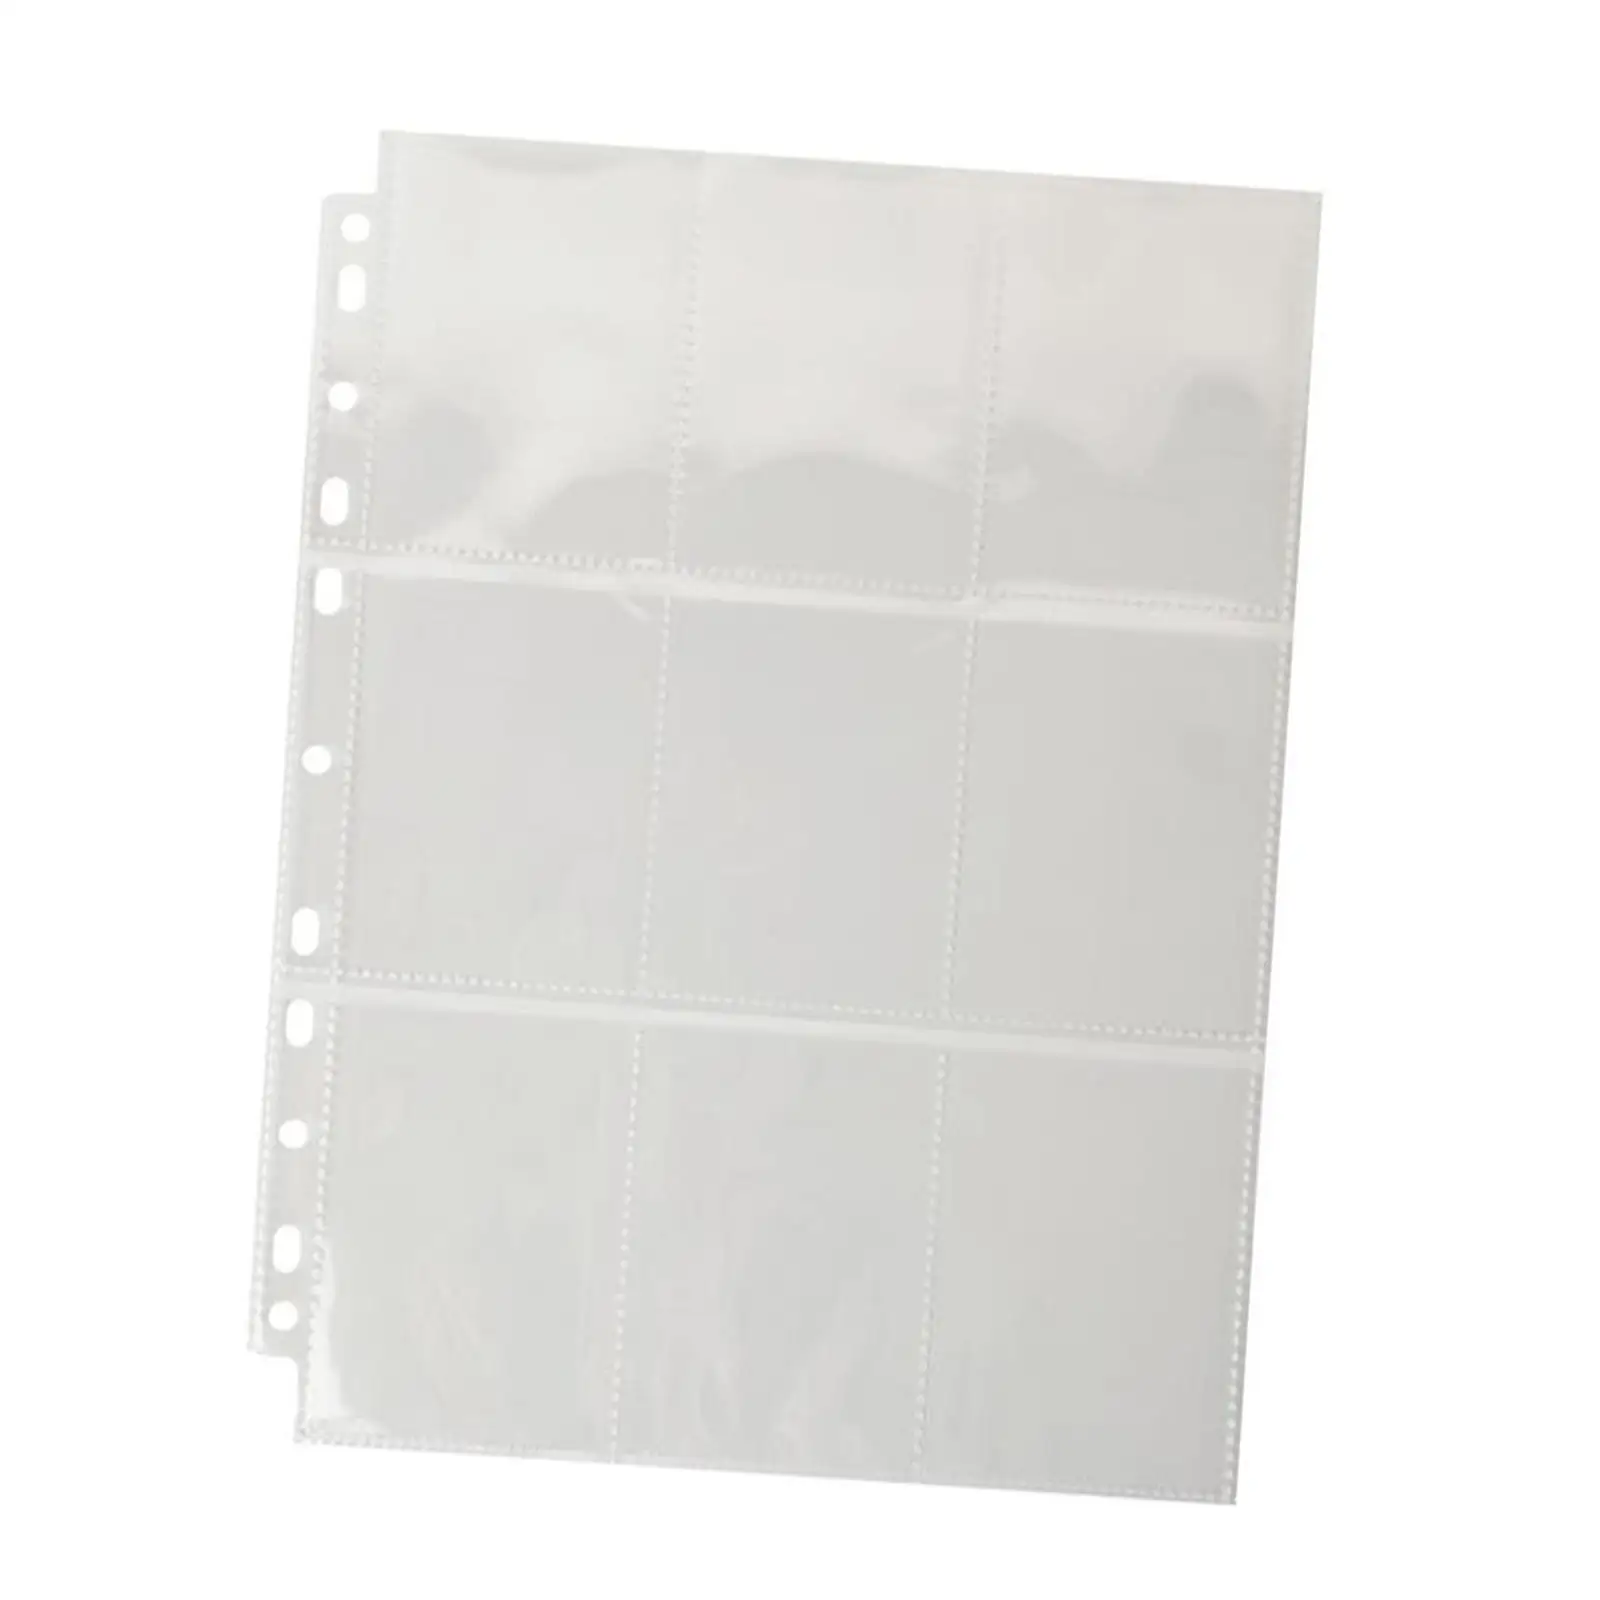 9-Pocket 20Pcs Clear Anti-Ultraviolet Plastic Waterproof Trading Card Page Sleeve Card Binder for Game Cards Album Pages Photo